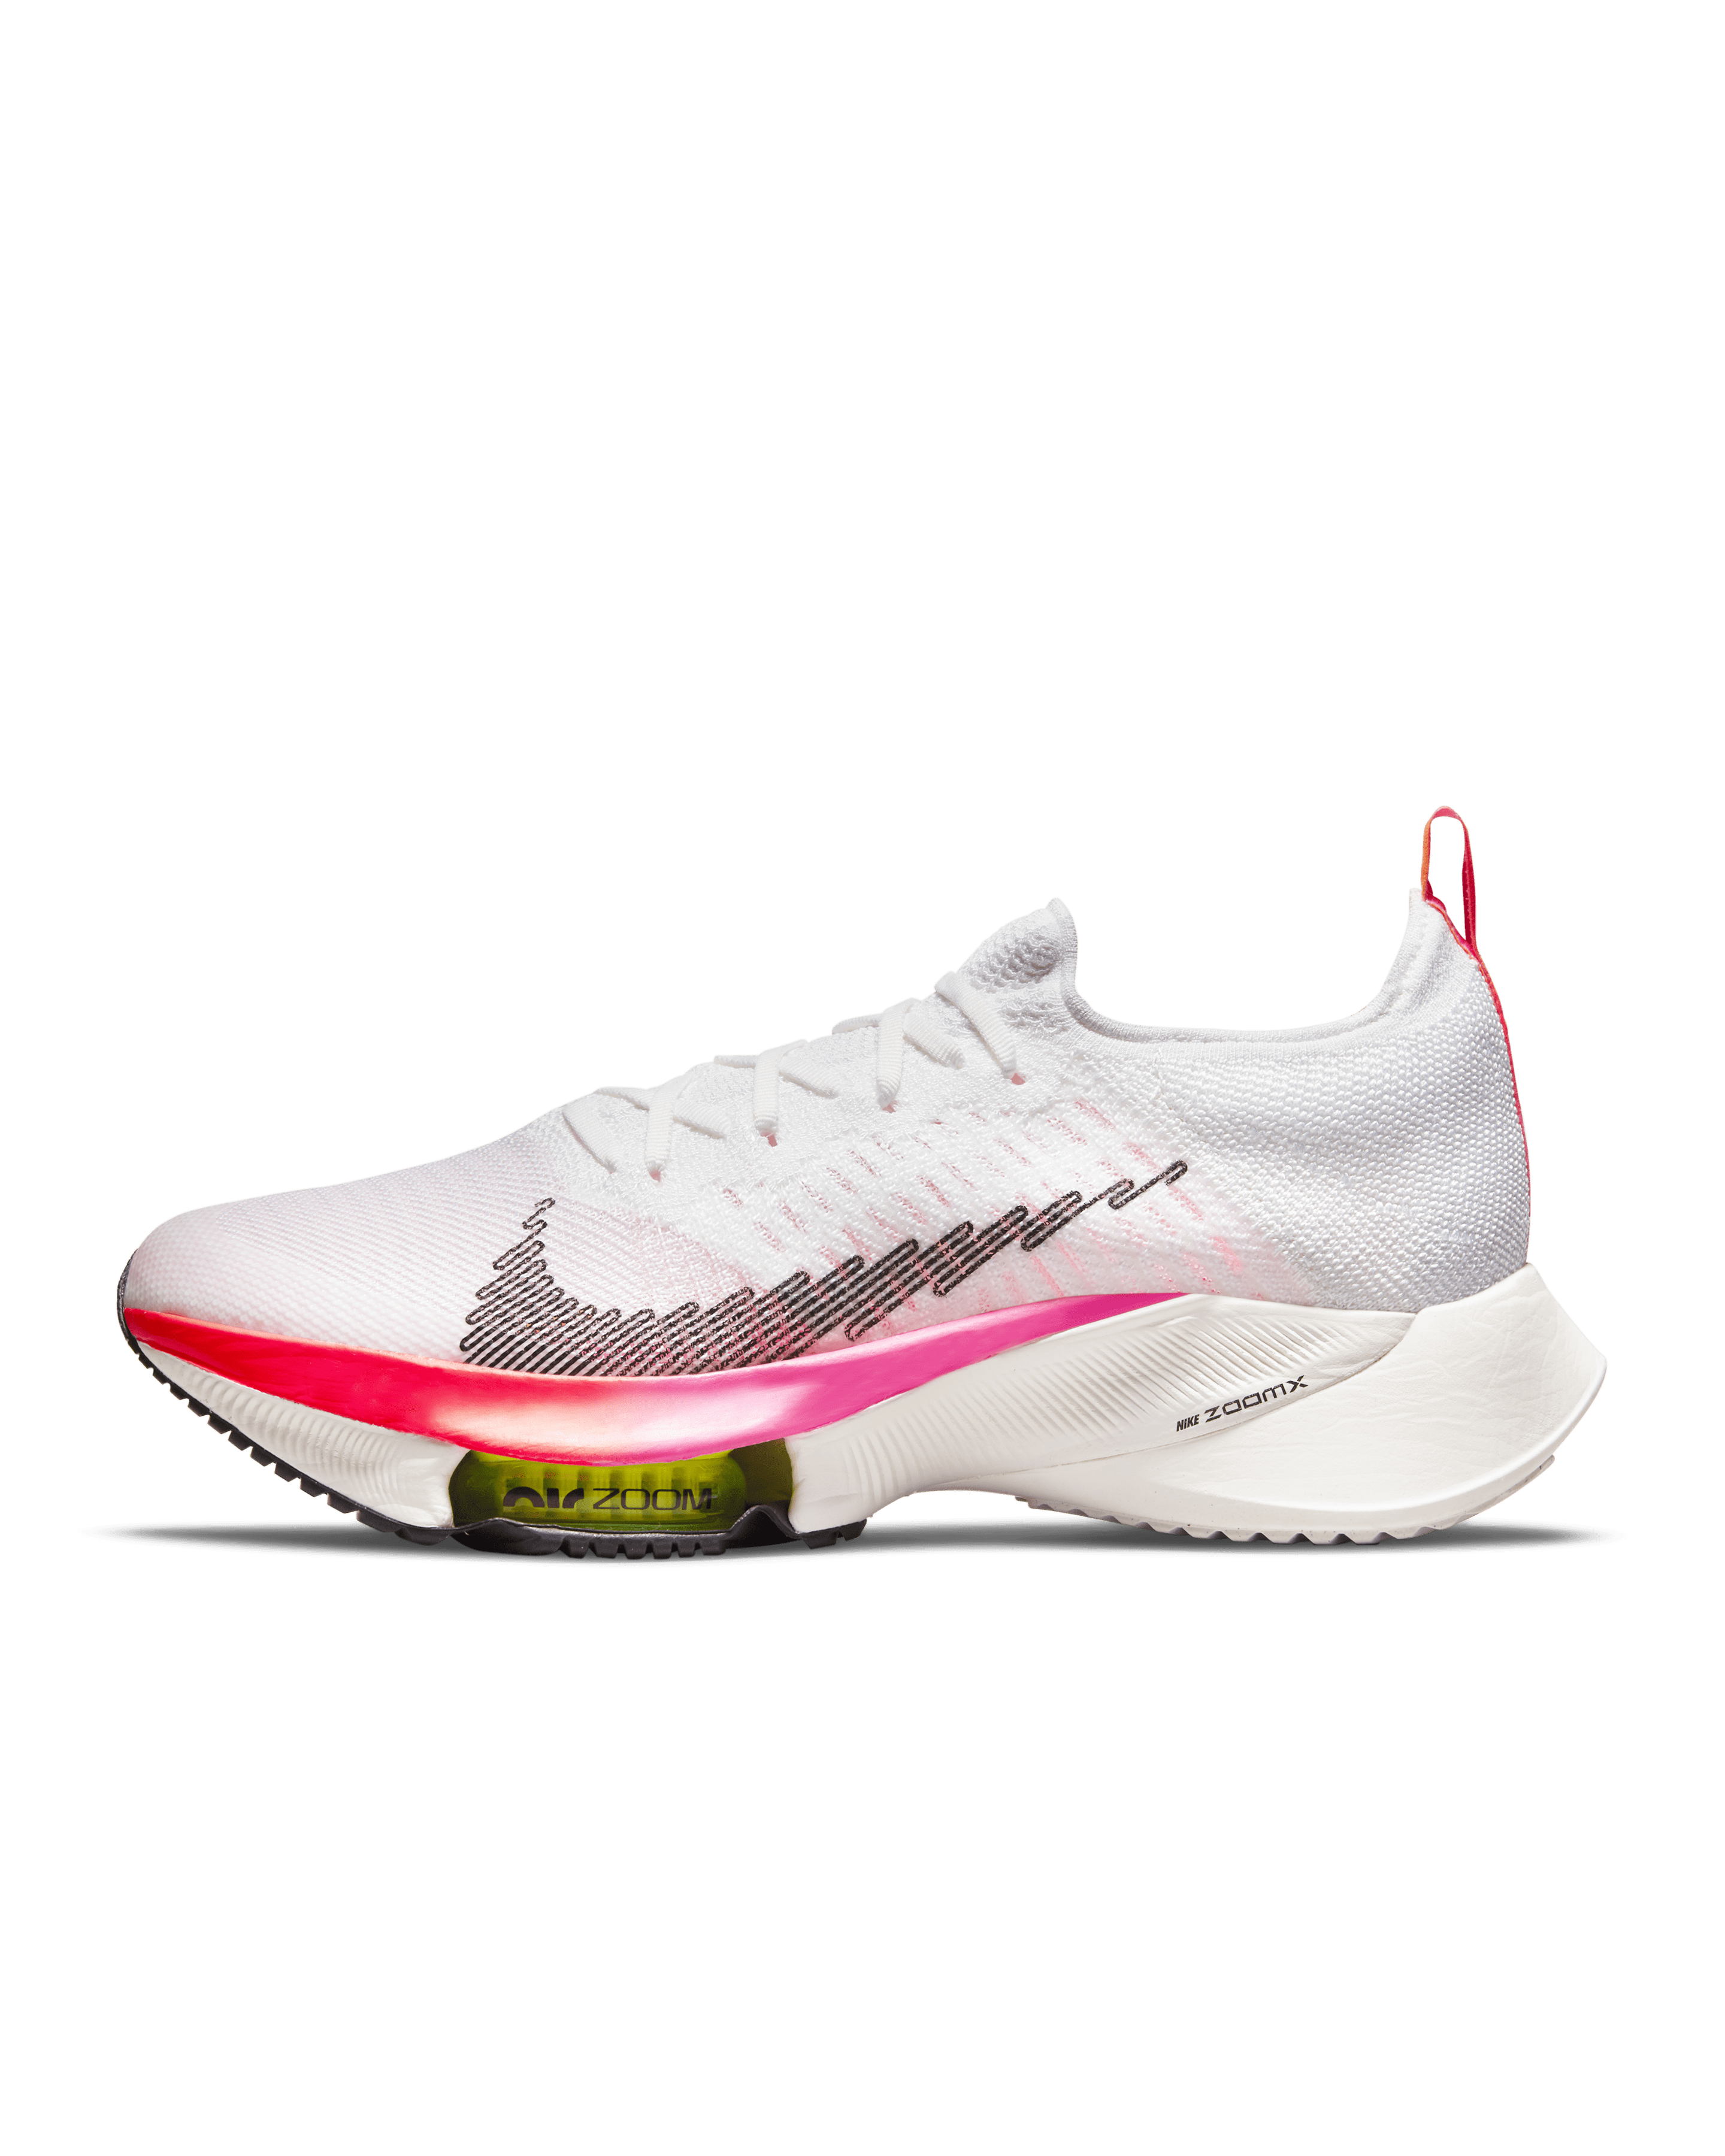 Thought place Flash 10 Best Nike Running Shoes of 2022 - Running Shoe Reviews